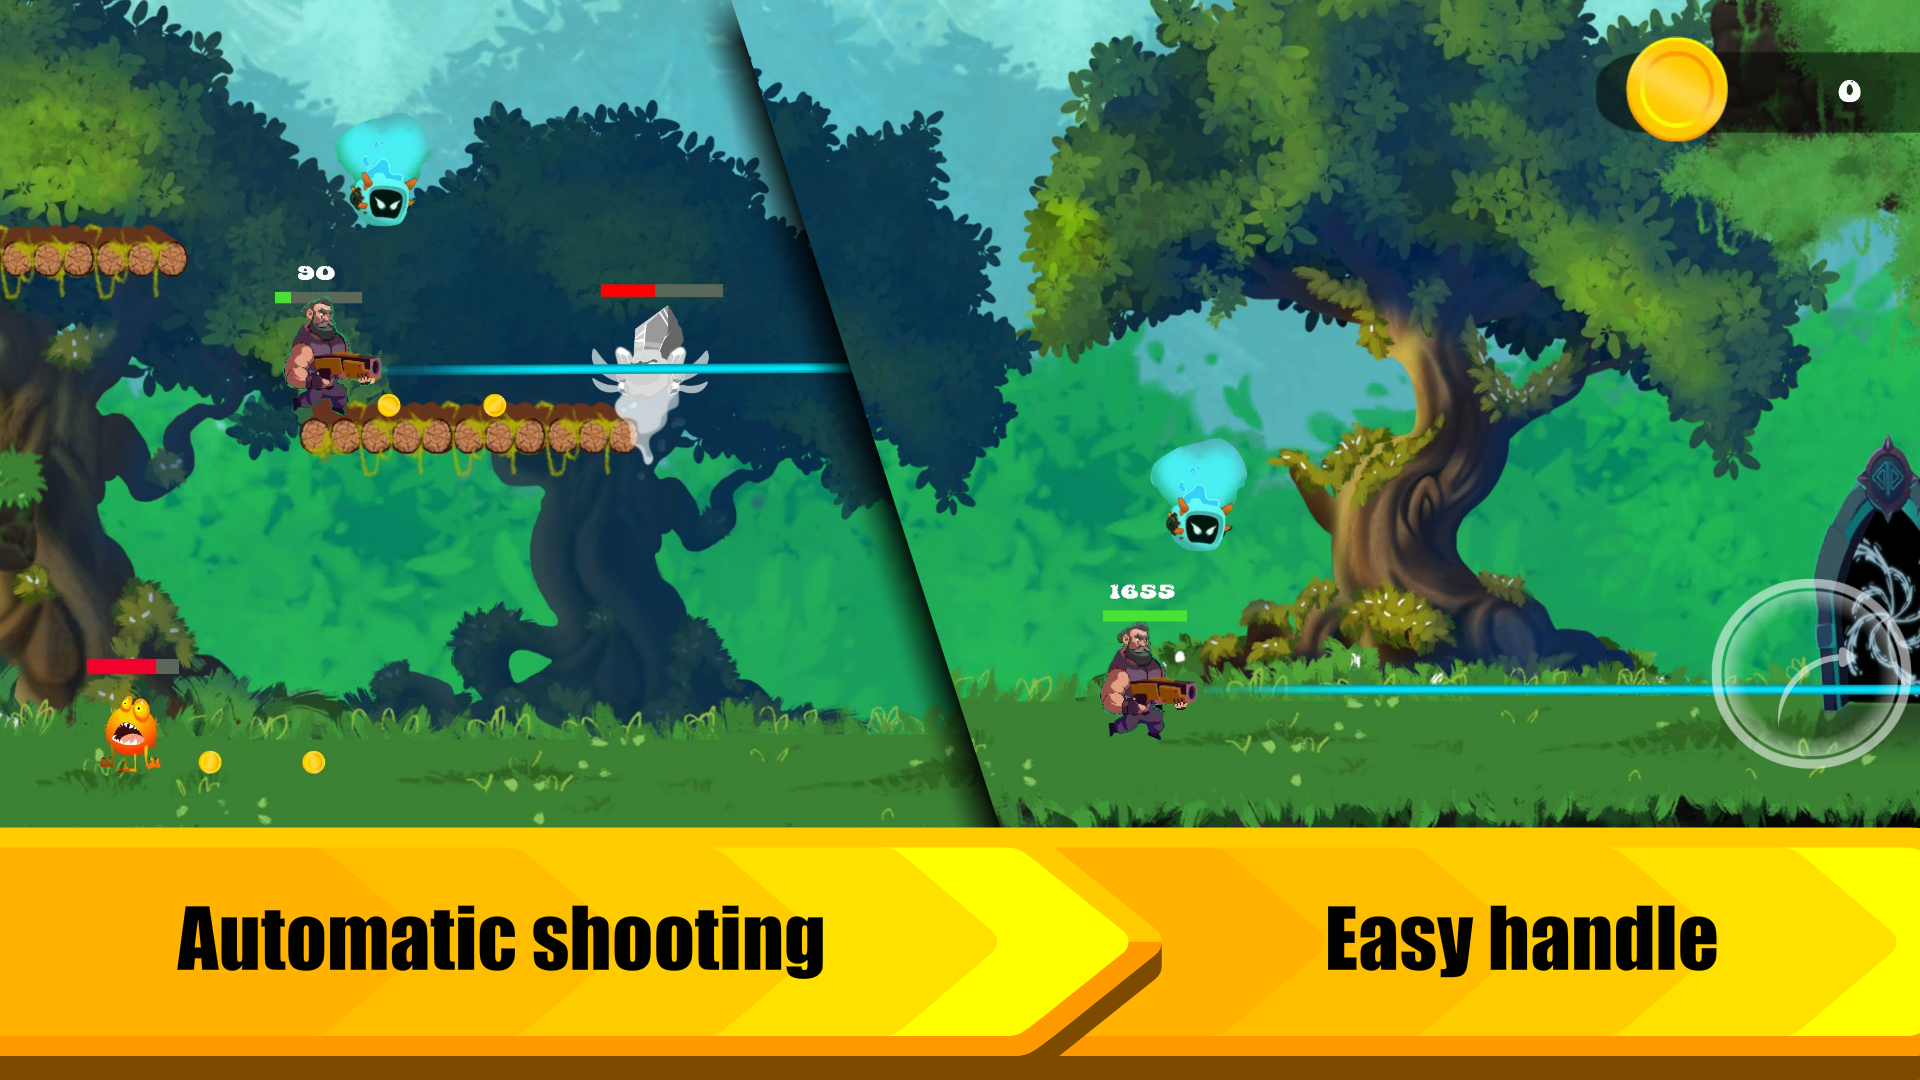 Auto Shooter: Roguelike 2D RPG Game遊戲截圖